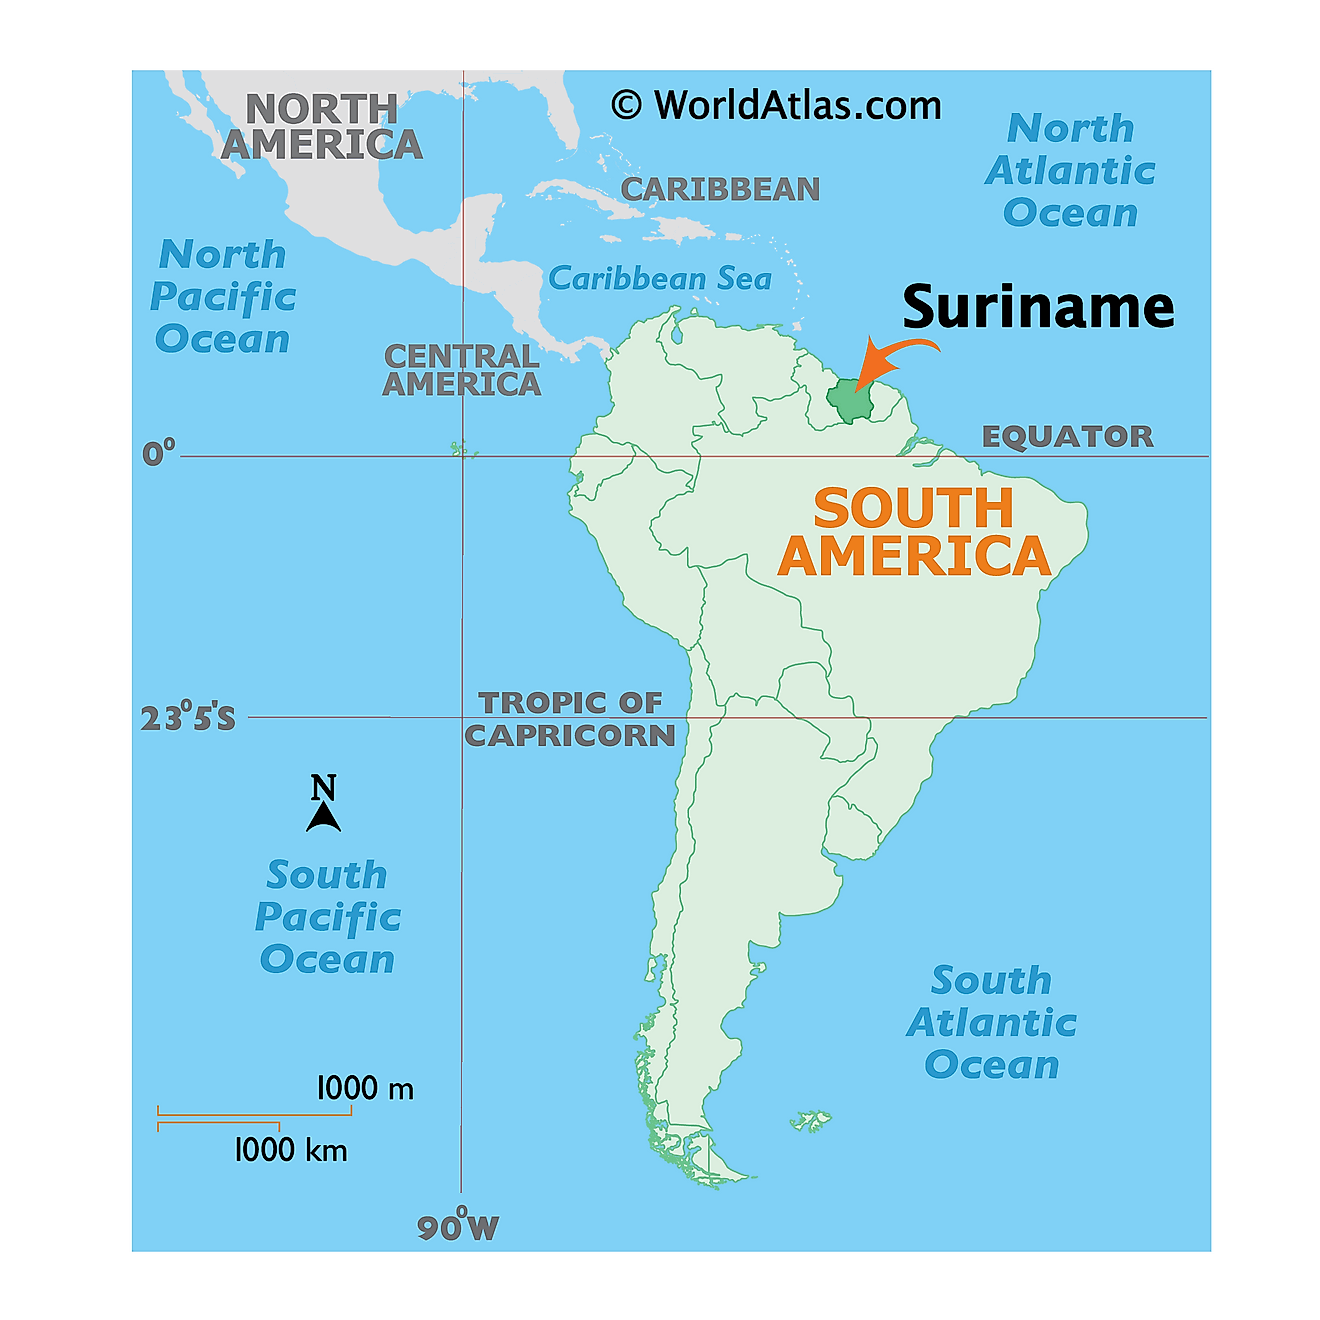 Where is Suriname?